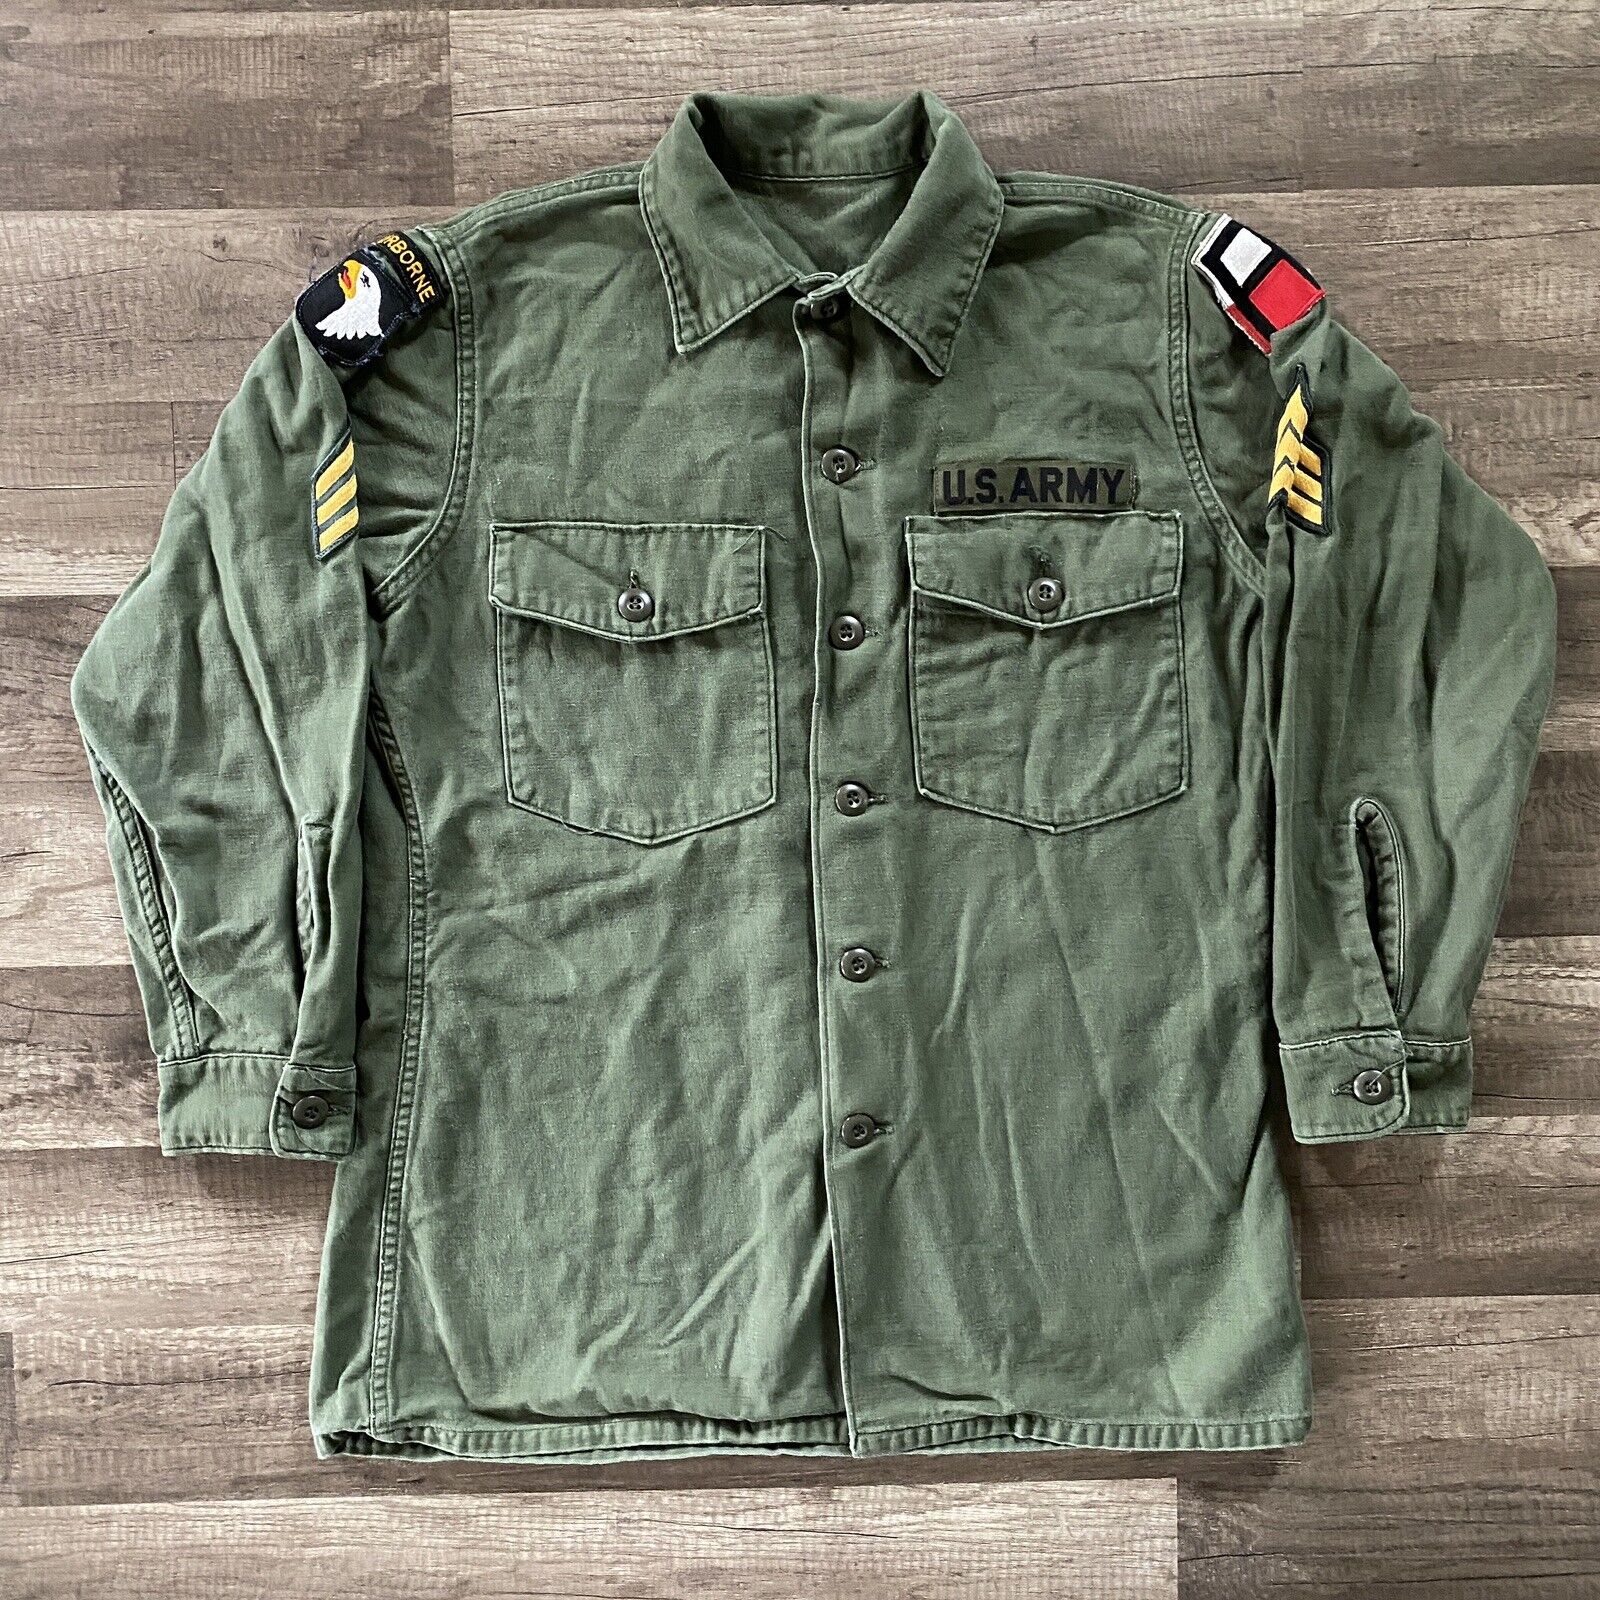 Vintage Vietnam OG 107 Cotton Sateen Utility Shirt Fatigue US With Patches